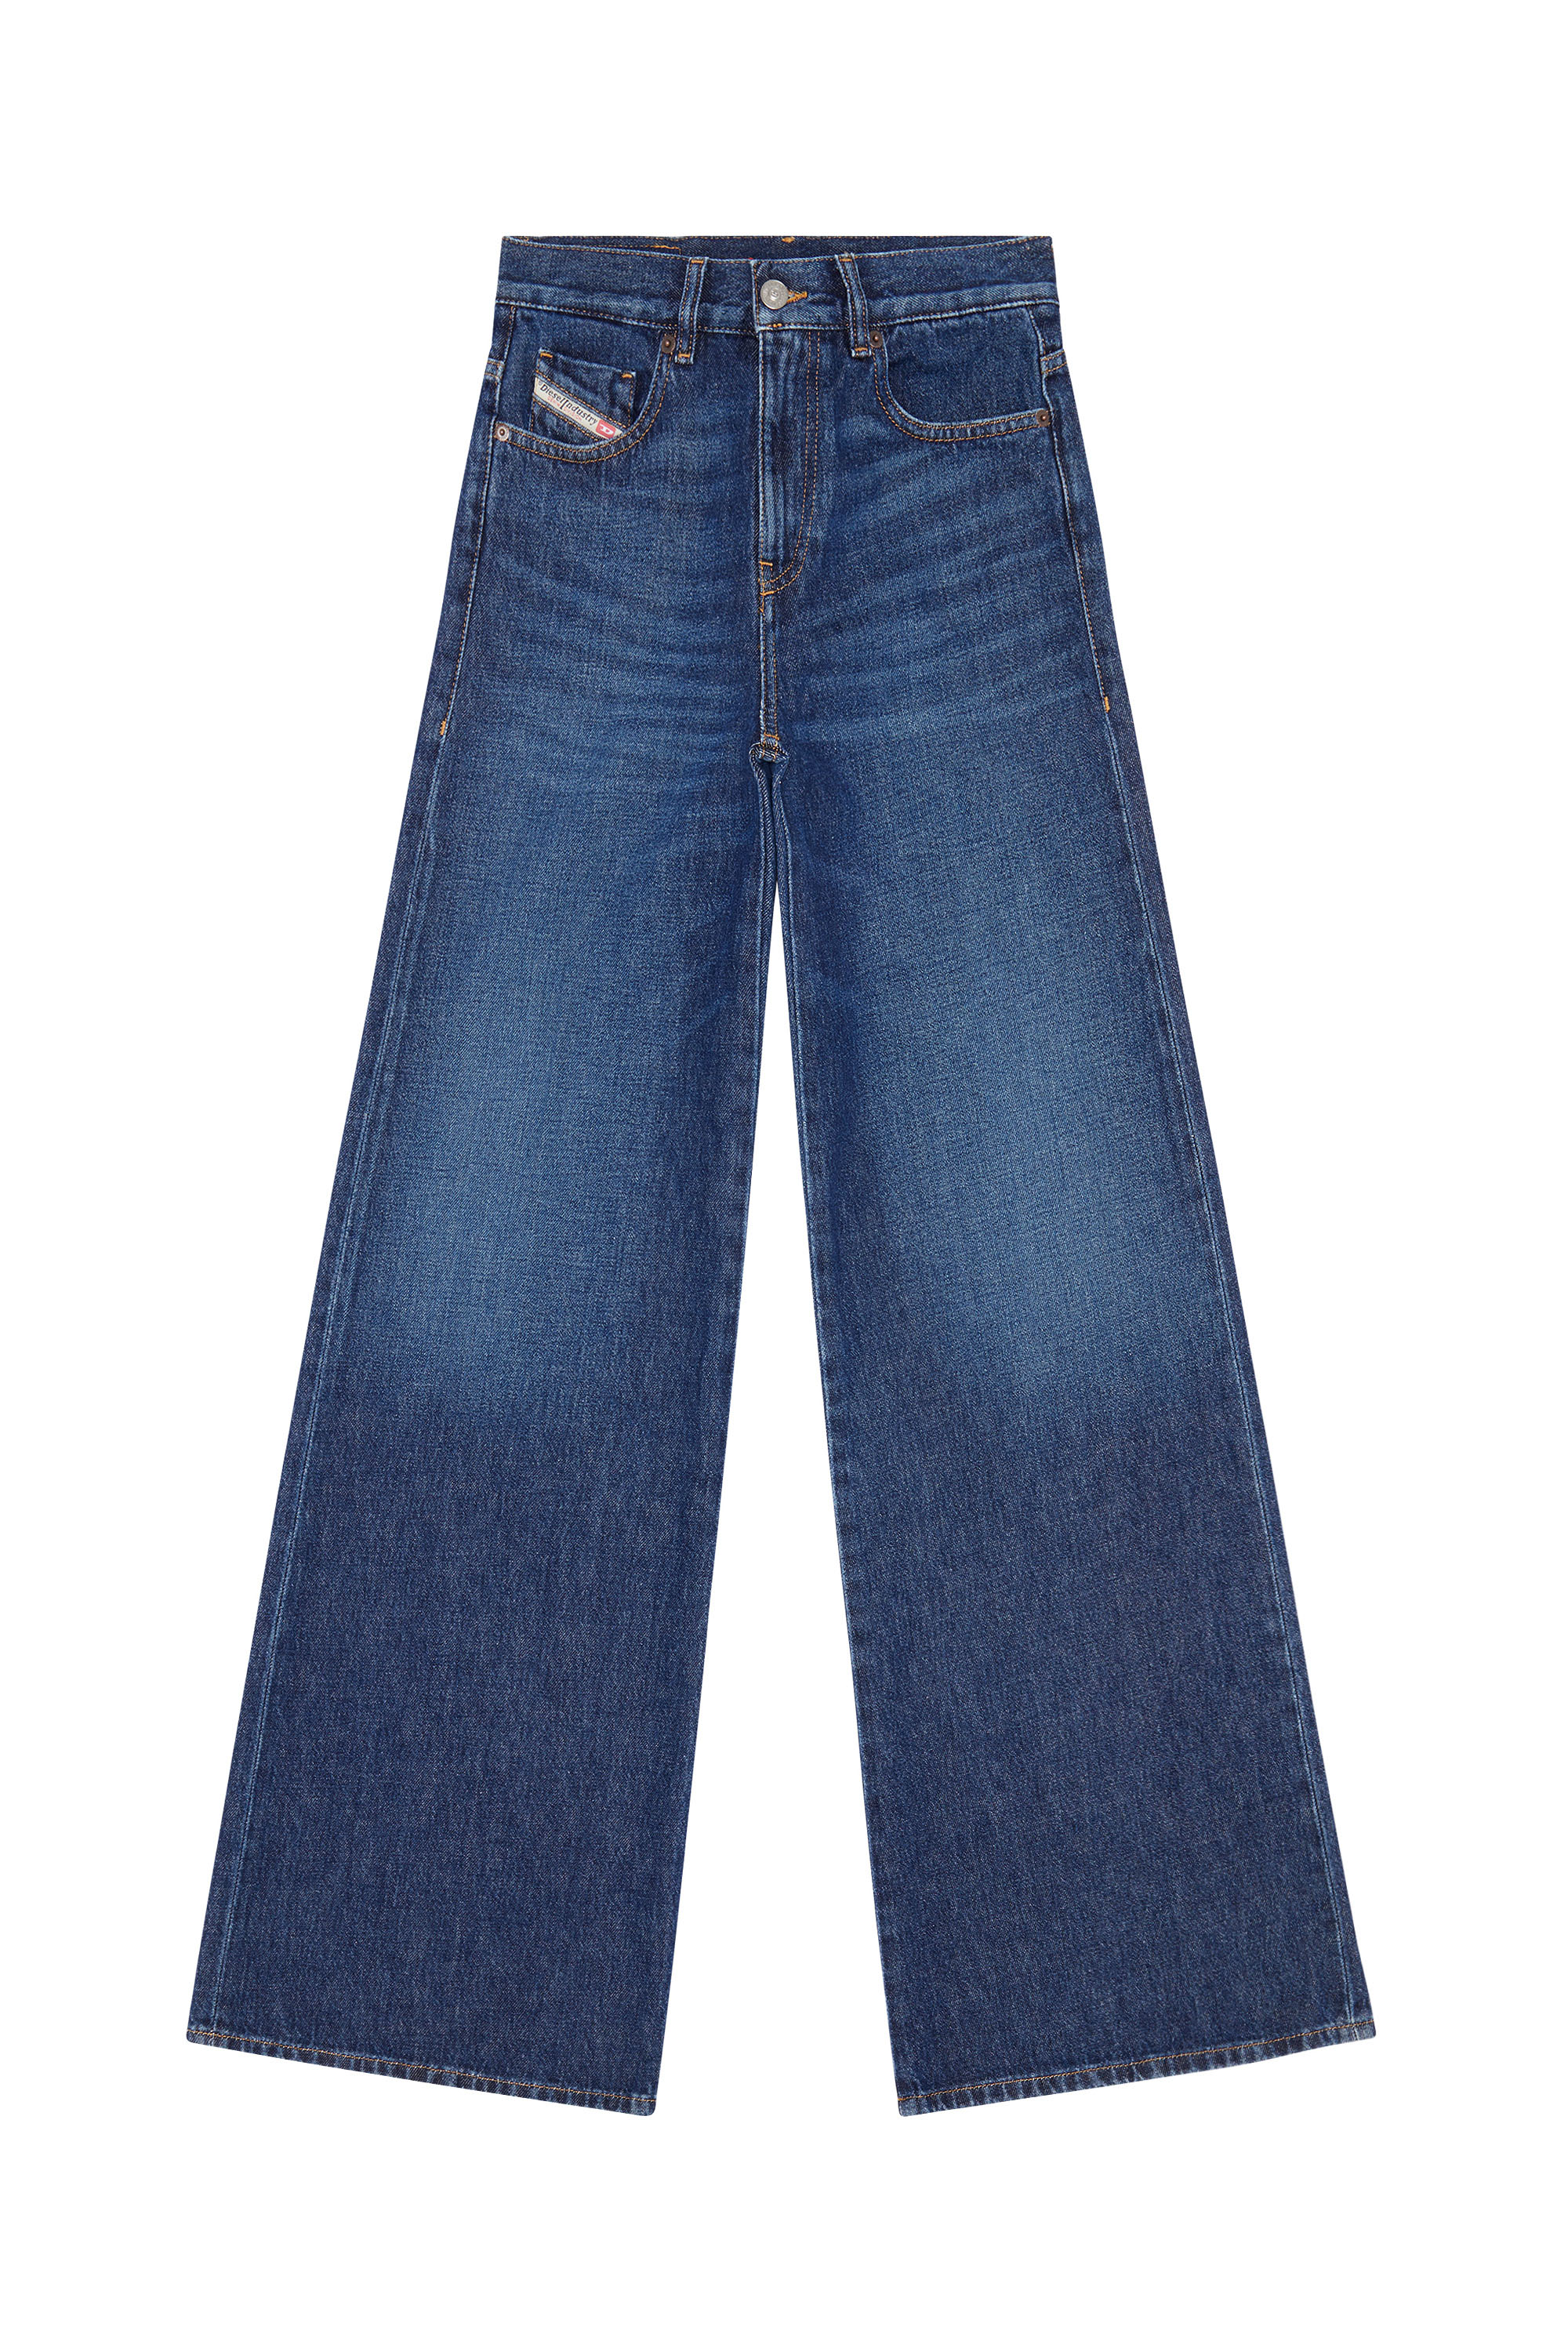 1978 D-Akemi 09C03 Bootcut and Flare Jeans, Dark Blue - Jeans